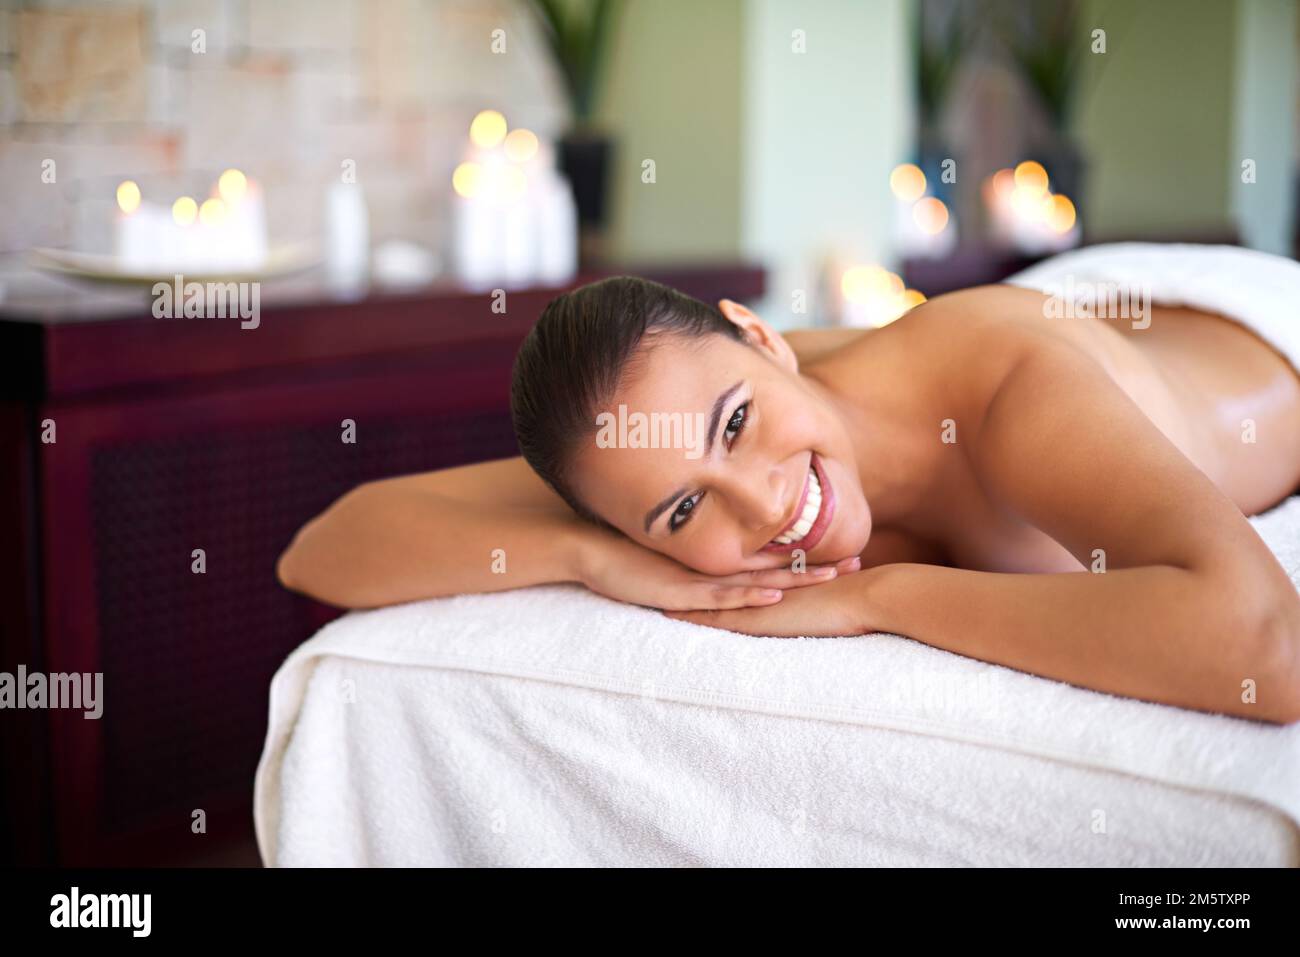 You are now entering a stress free zone. an attractive woman enjoying a day at a health spa. Stock Photo